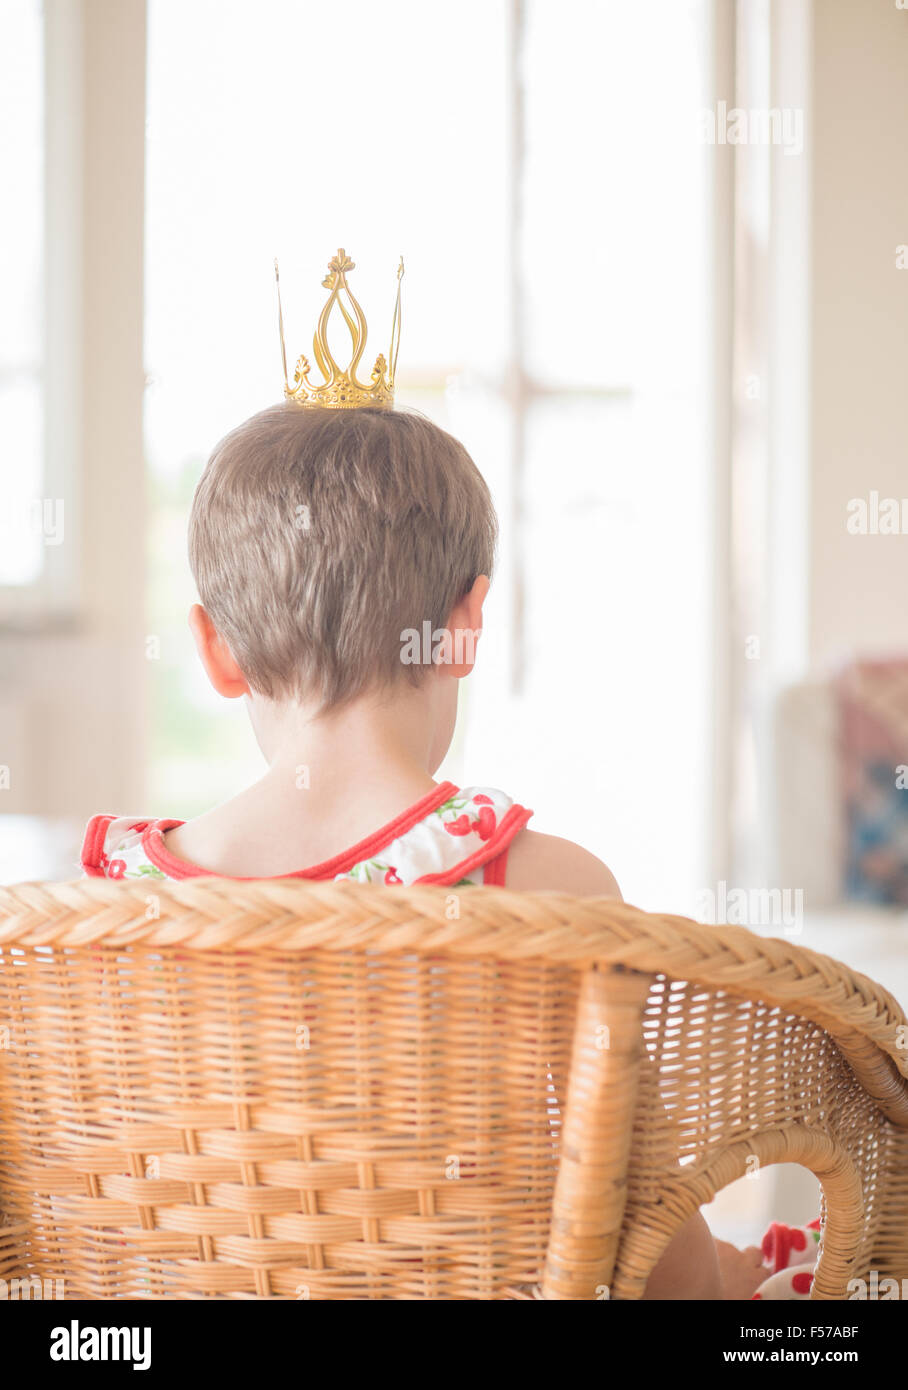 Little girl playing princess at home in living room. Concept of childhood, aspirations and innocence. Stock Photo